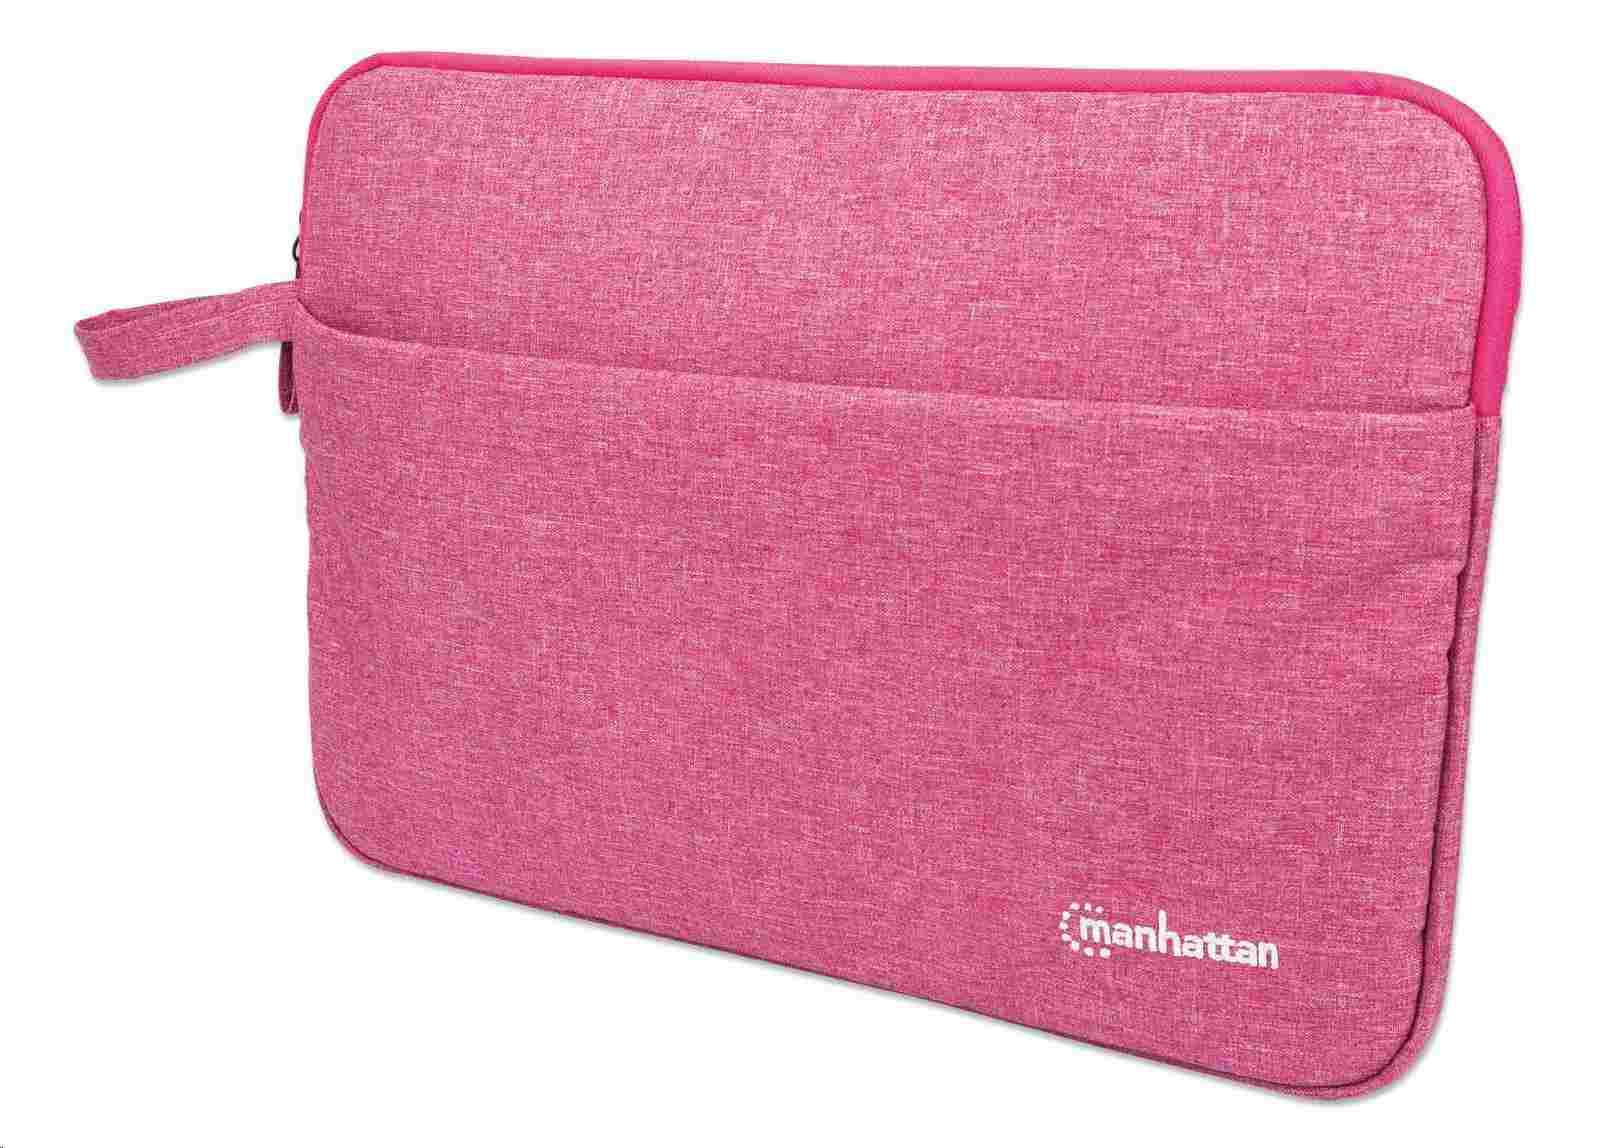 MANHATTAN Pouzdro Laptop Sleeve Seattle, Fits Widescreens Up To 14.5", 383 x 270 x 30 mm, Coral 439923